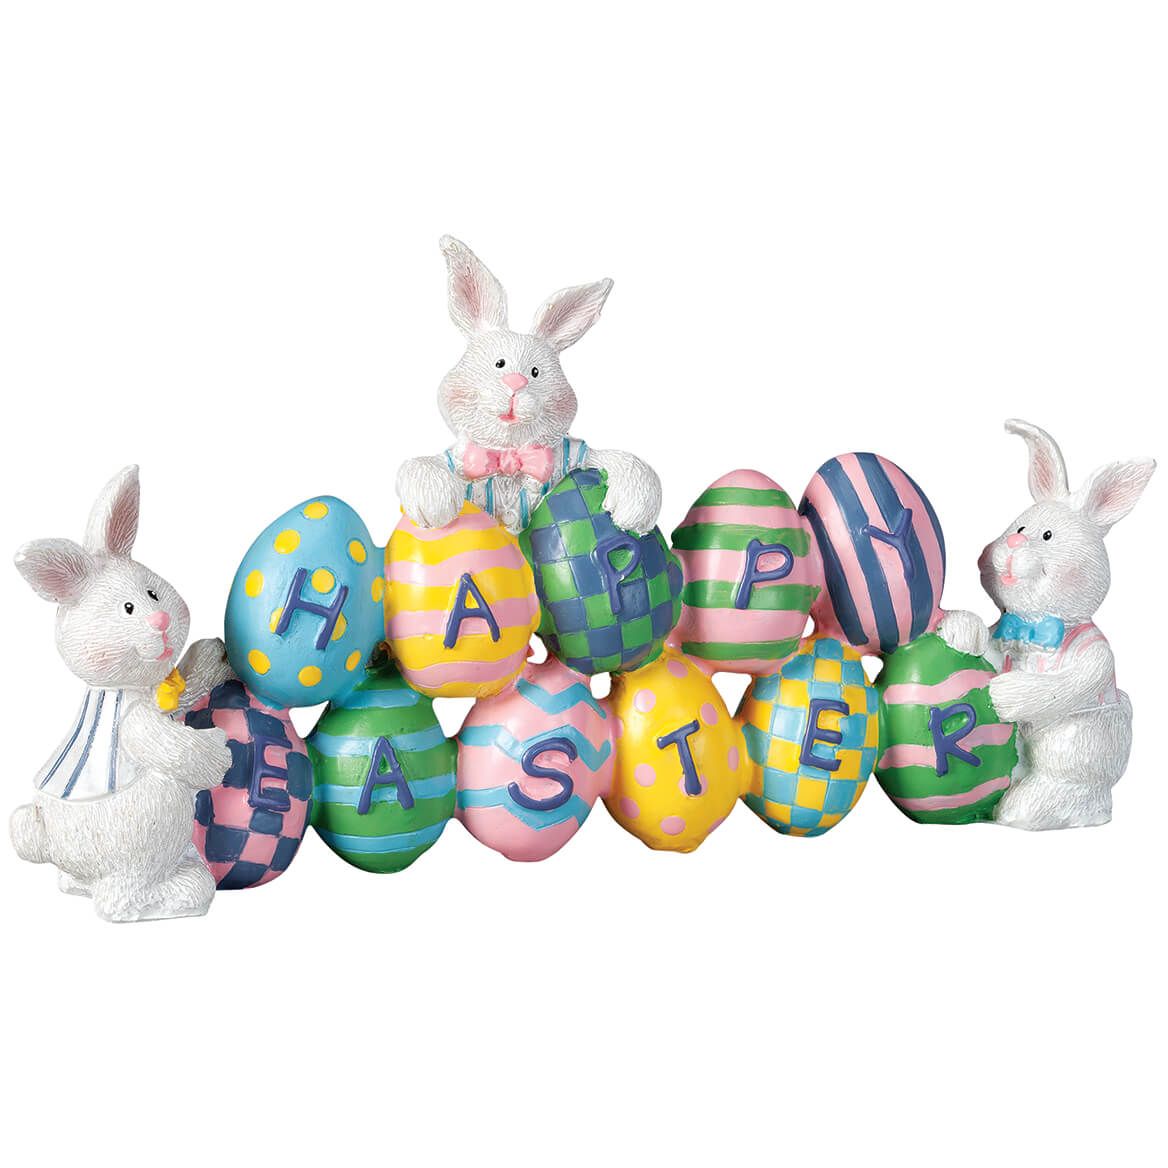 Resin Happy Easter Bunny Table Sitter by Holiday Peak™ + '-' + 371223